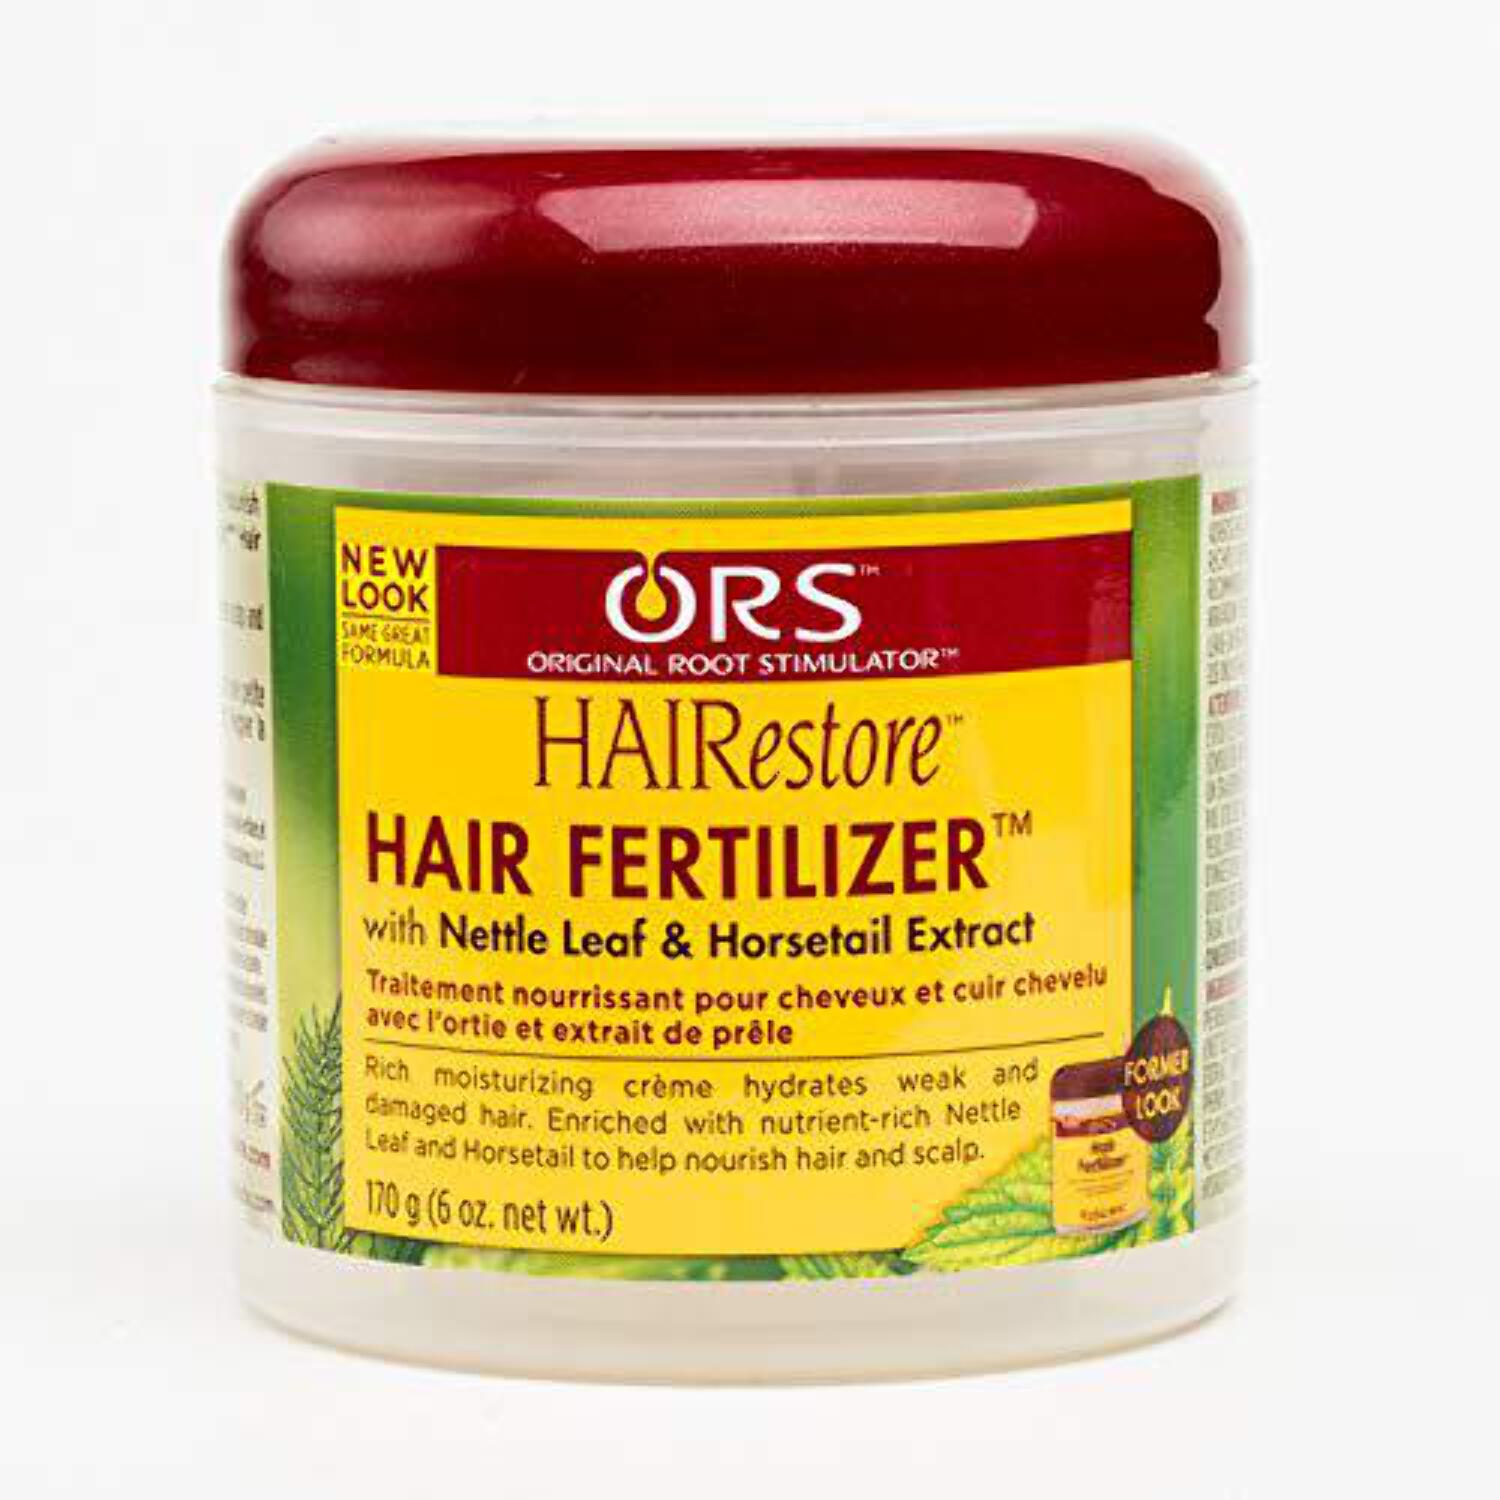 ORS HAIRestore Hair Fertilizer with Nettle Leaf & Horsetail Extract 6 oz - image 3 of 3